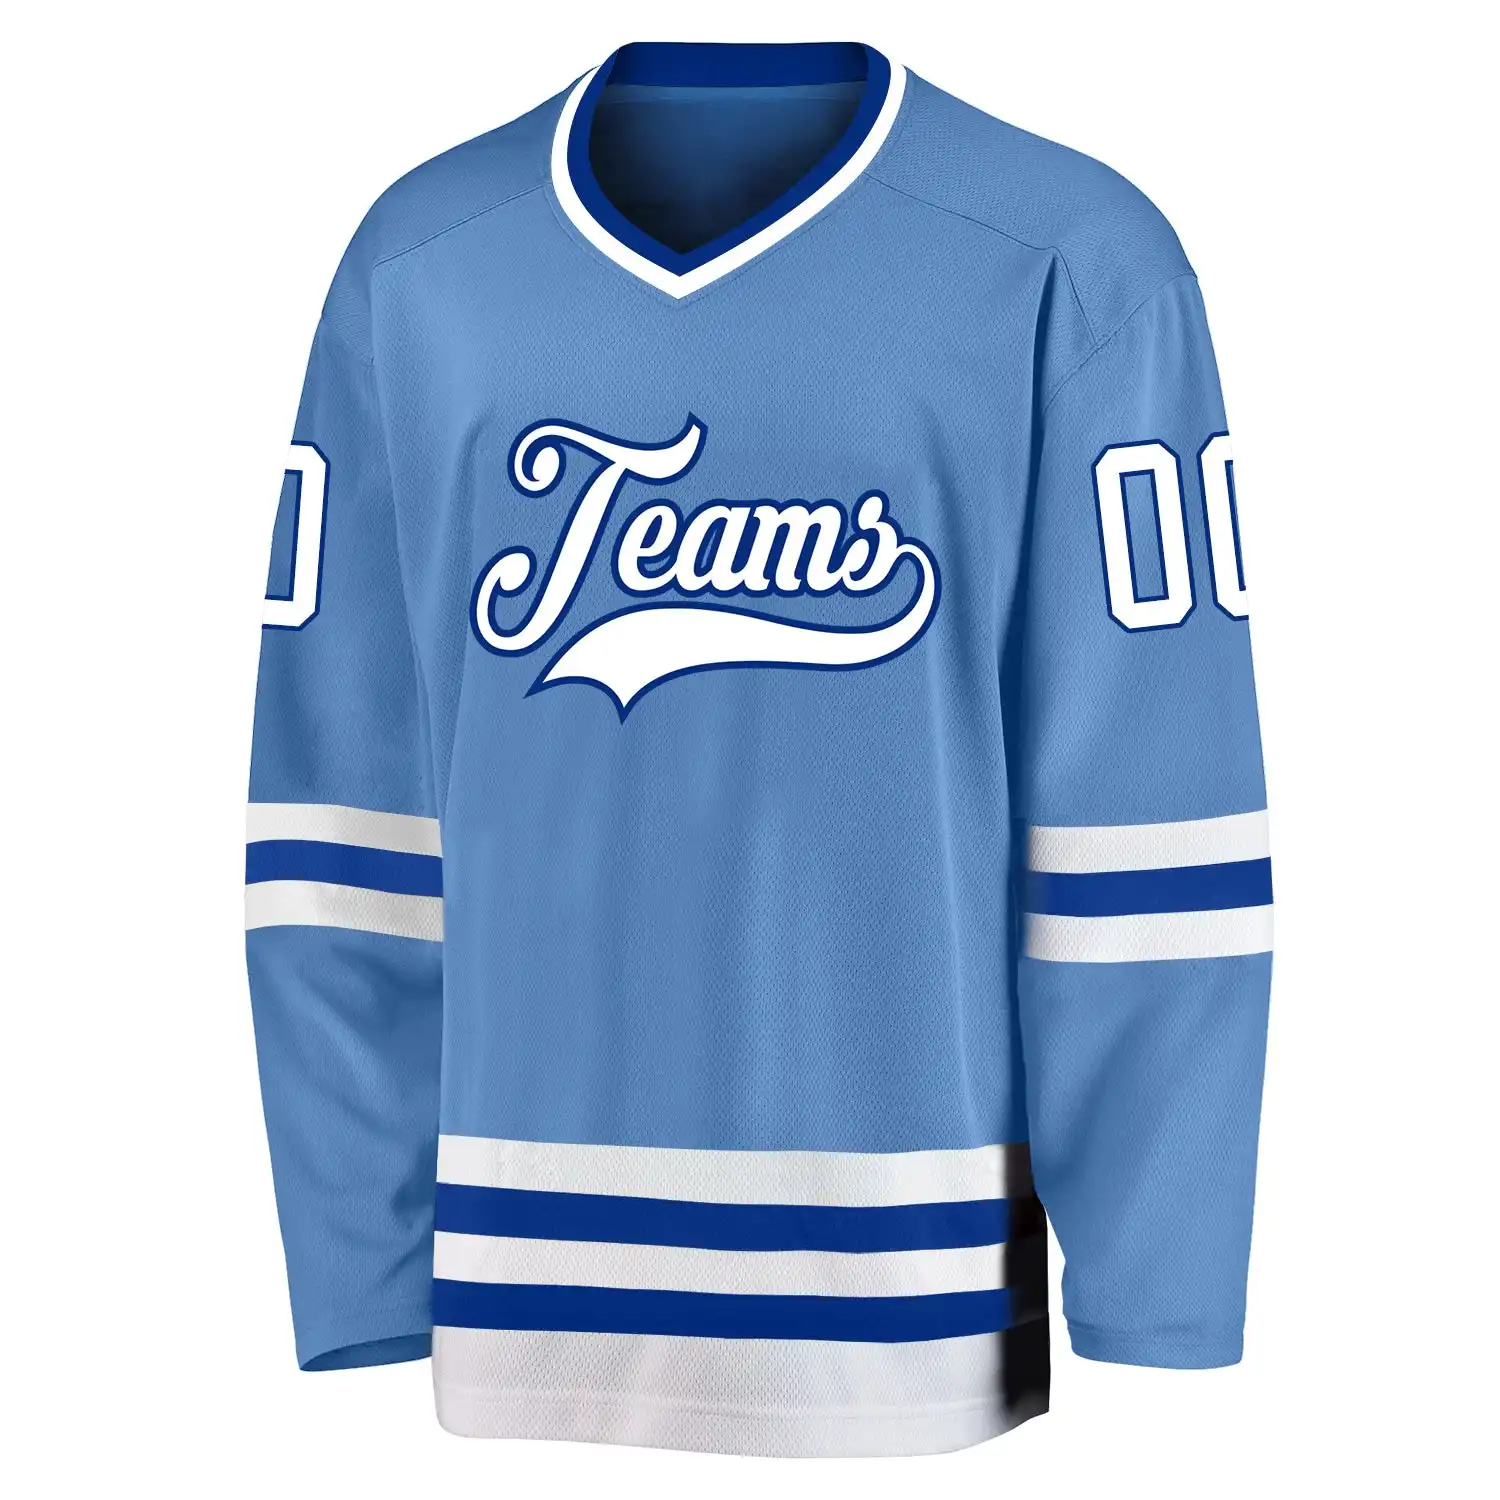 Inktee Store - Stitched And Print Light Blue White-Royal Hockey Jersey Custom Image